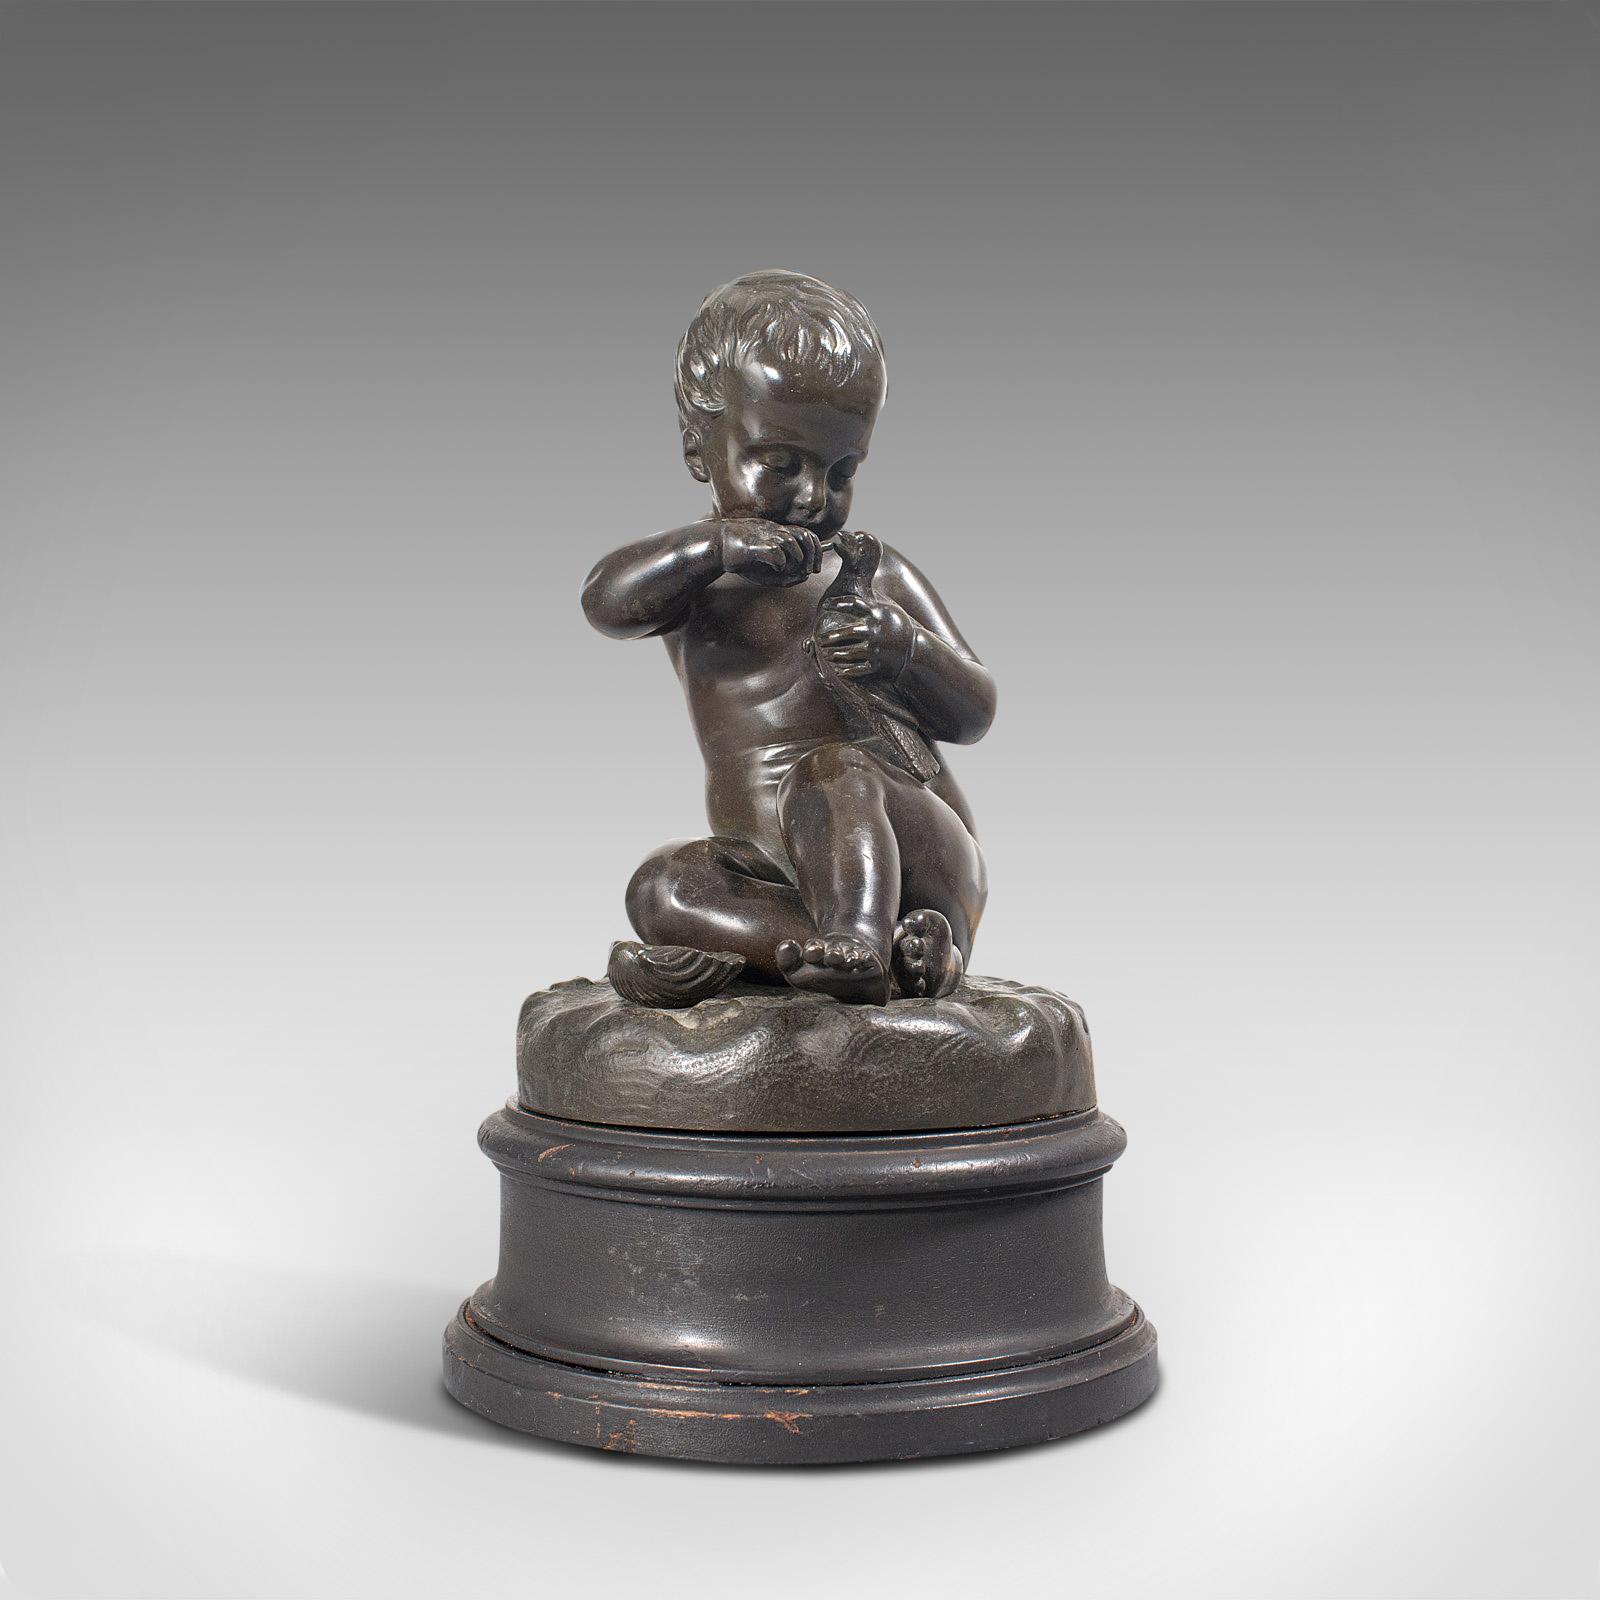 This is an antique putto statue. A French, bronze seated cherub figure with small bird in hand, dating to the late 19th century and later, circa 1900.

Charming putto with fascinating quality
Displaying a desirable aged patina
Inviting bronze